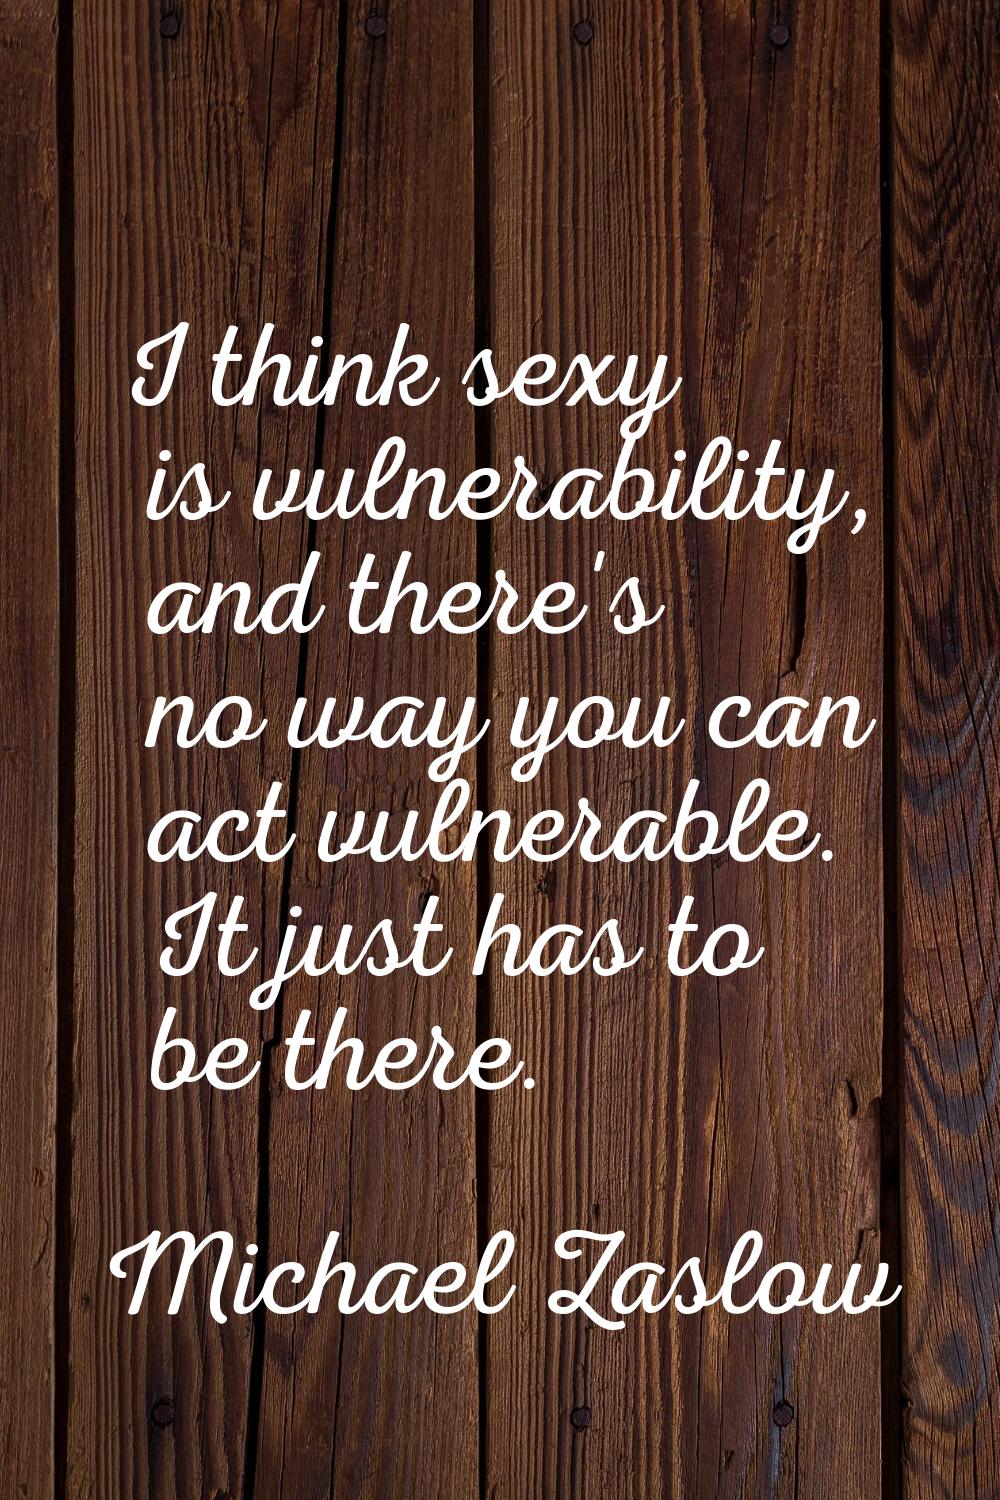 I think sexy is vulnerability, and there's no way you can act vulnerable. It just has to be there.